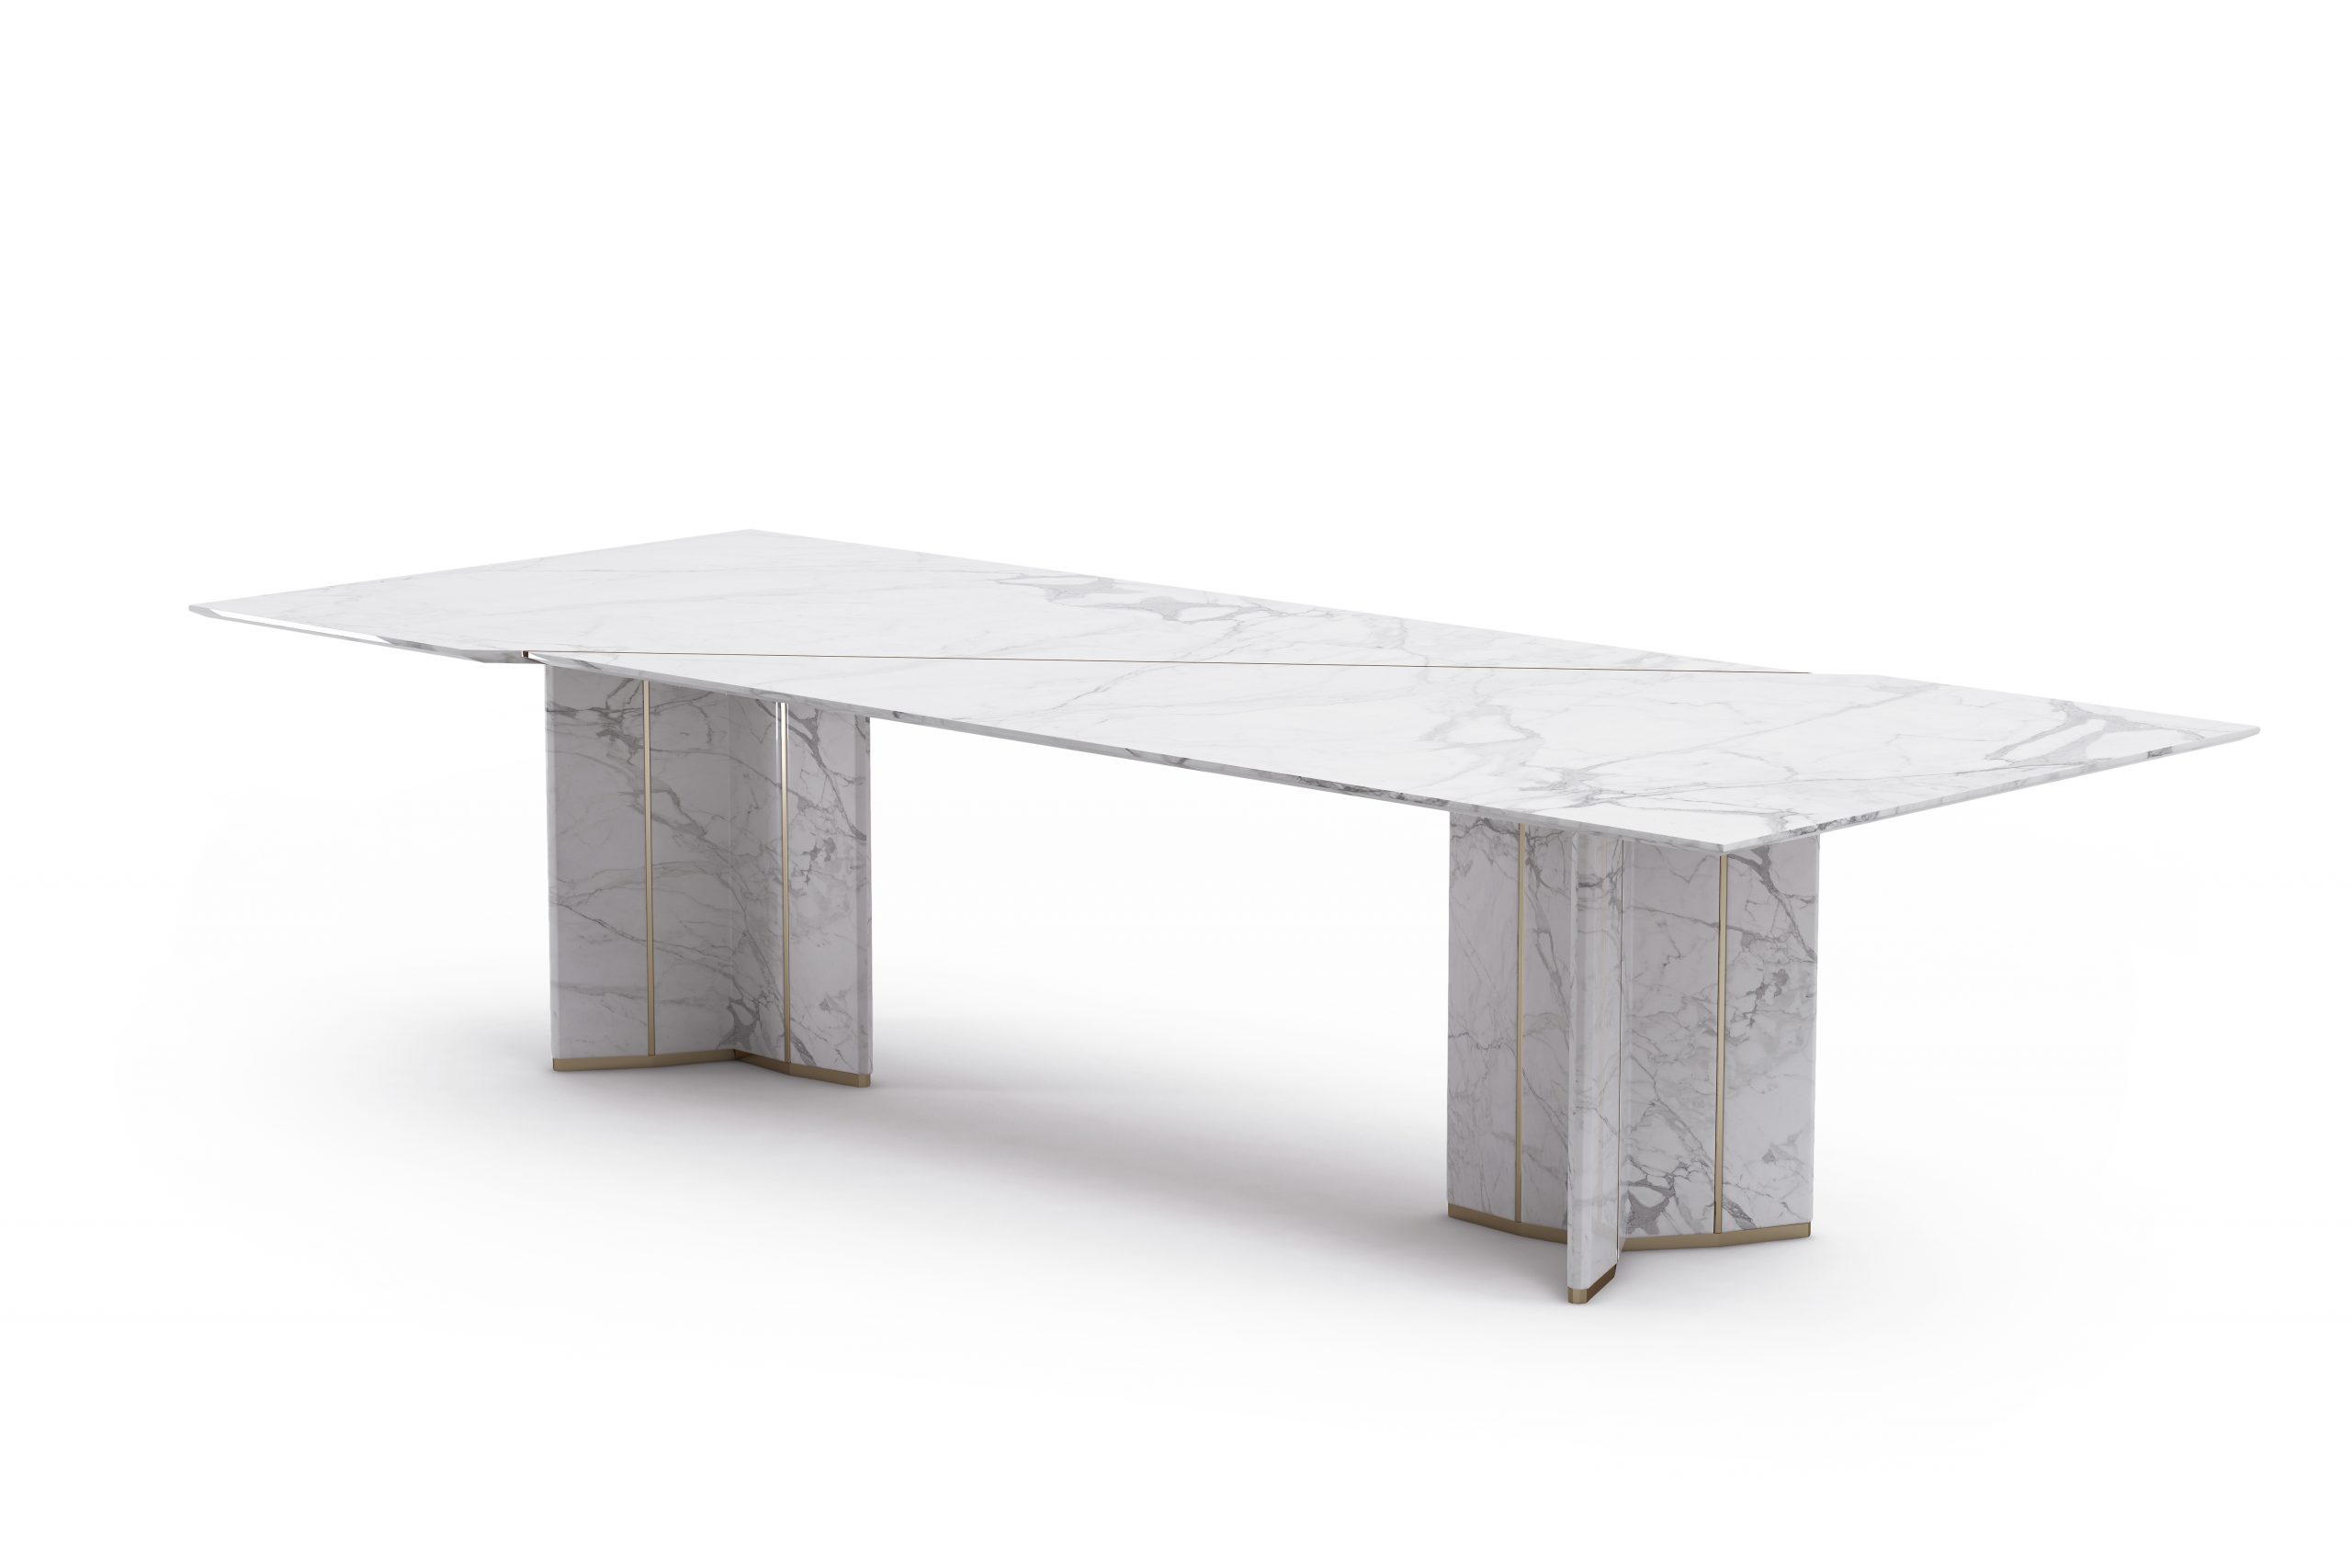 Best Selection Of Dining Tables To Adorn Your Dining Room!